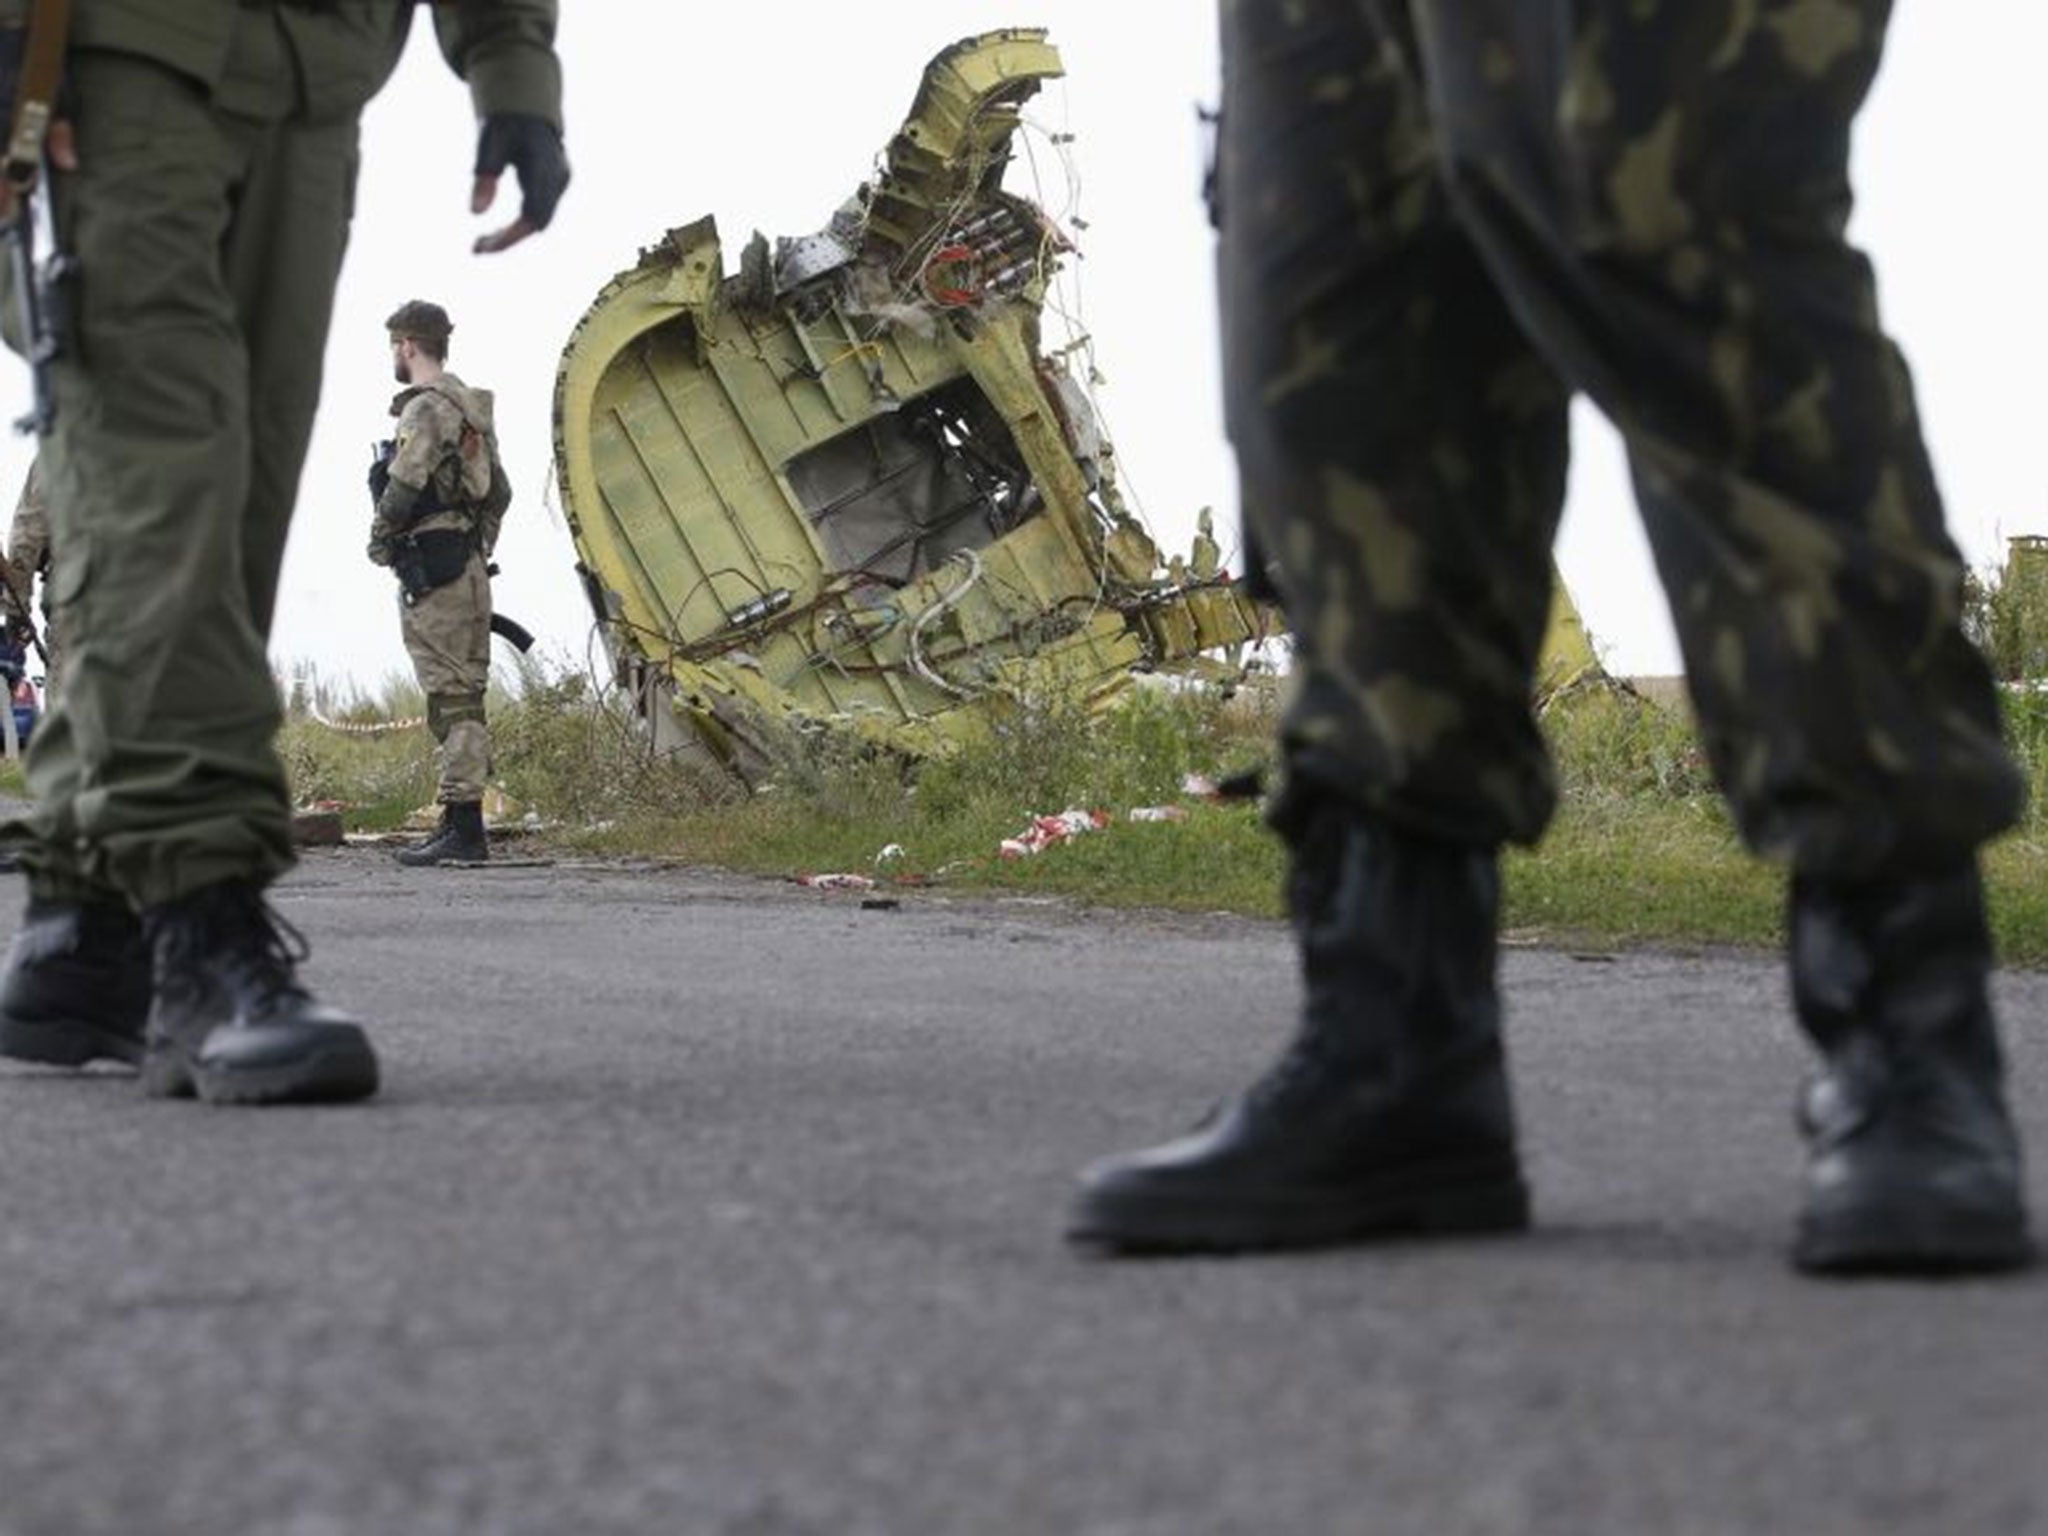 Armed pro-Russian separatists stand guard on the site where Malaysia Airlines Flight MH17 crashed